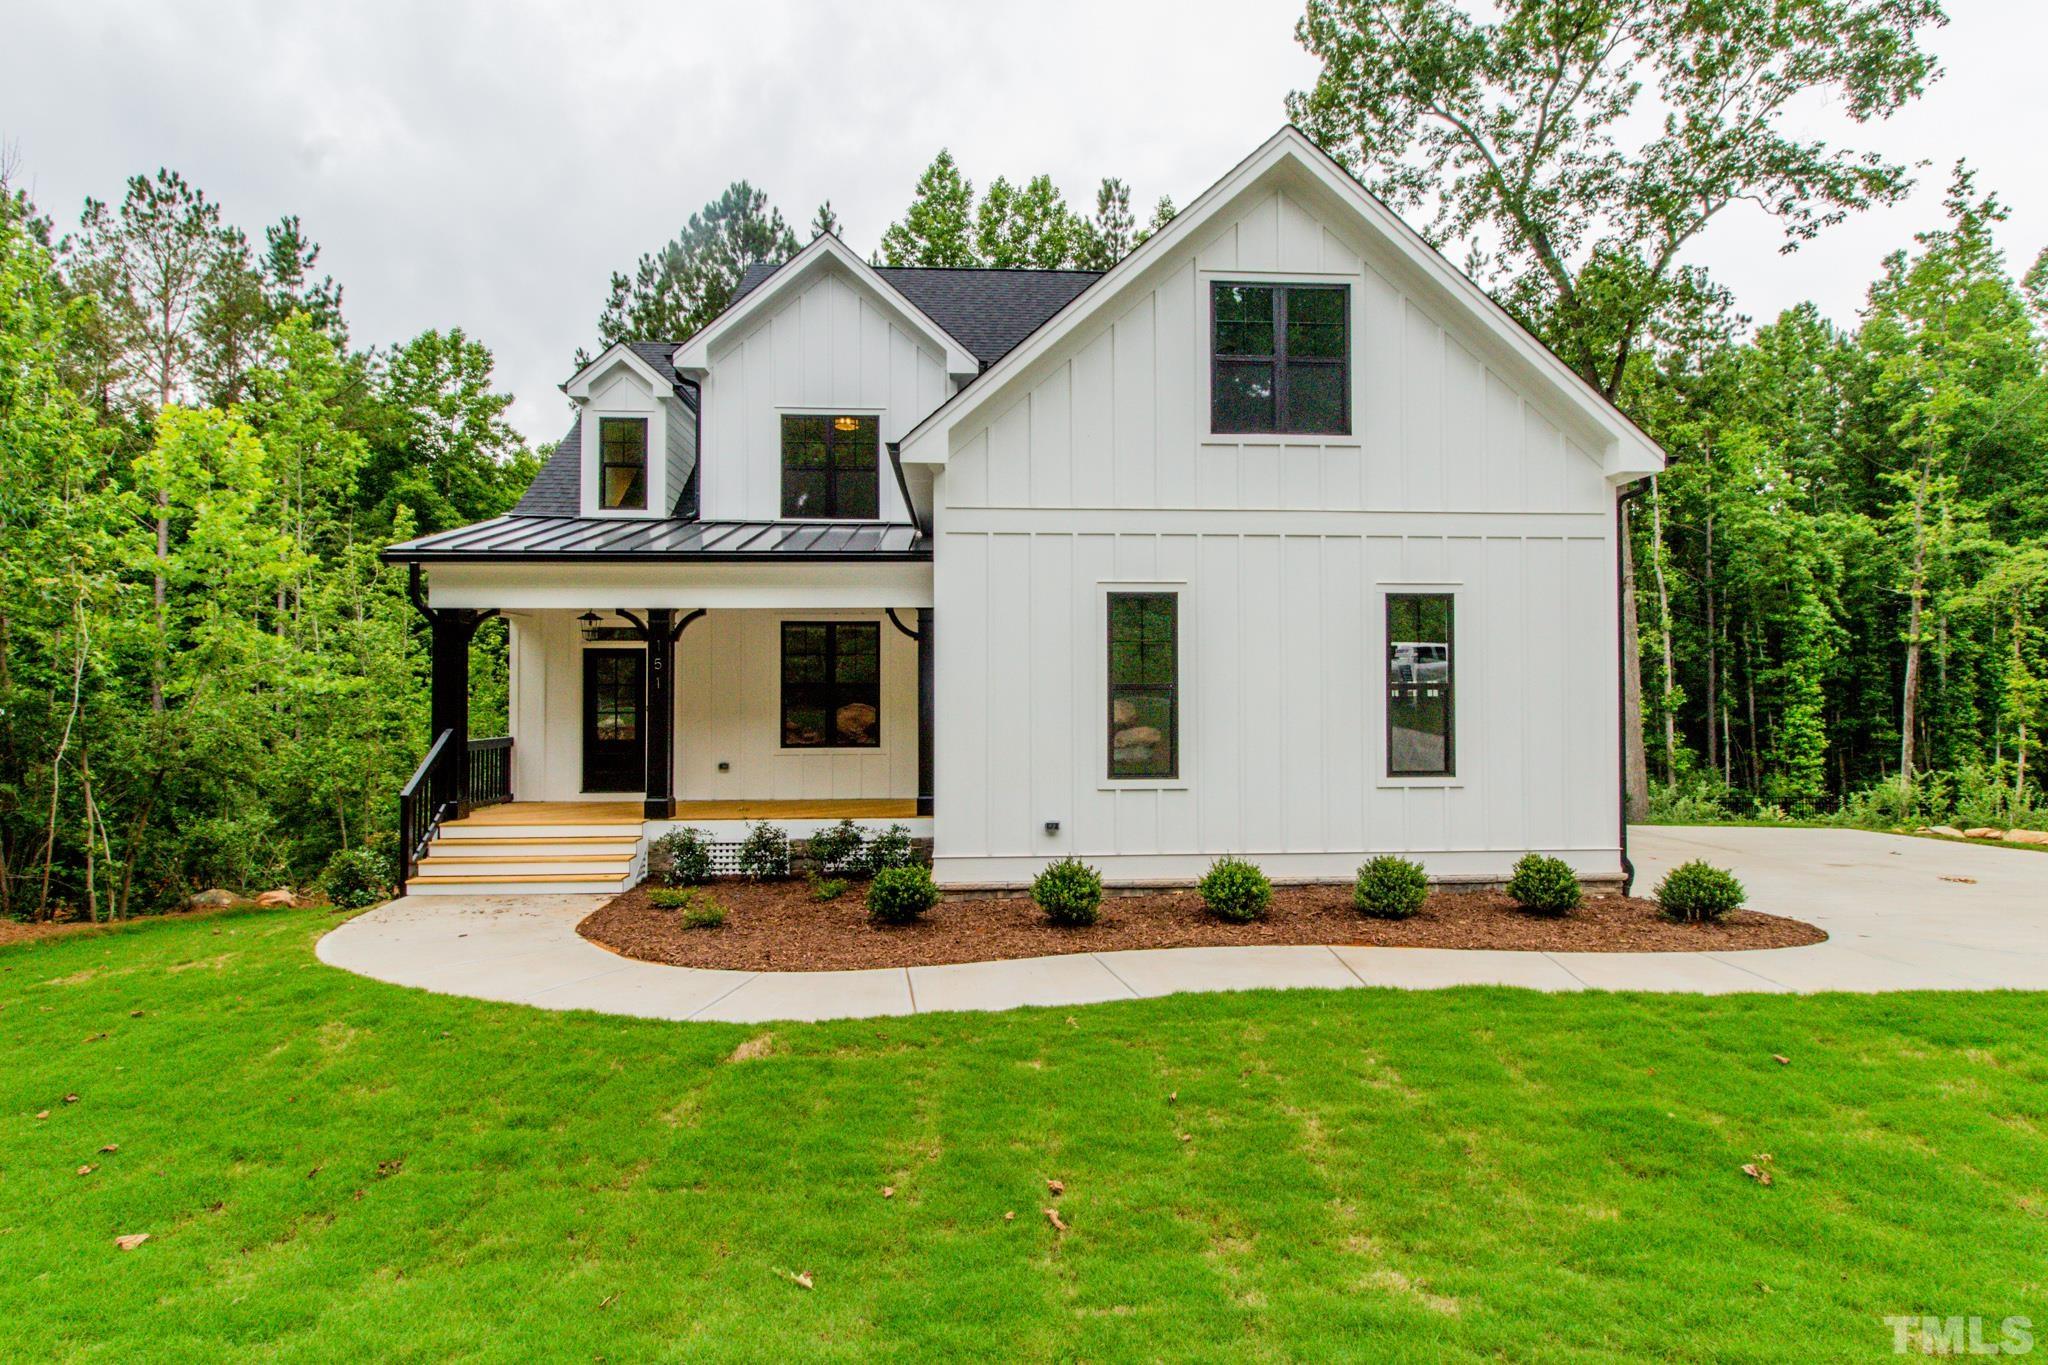 Pittsboro Home for Sale